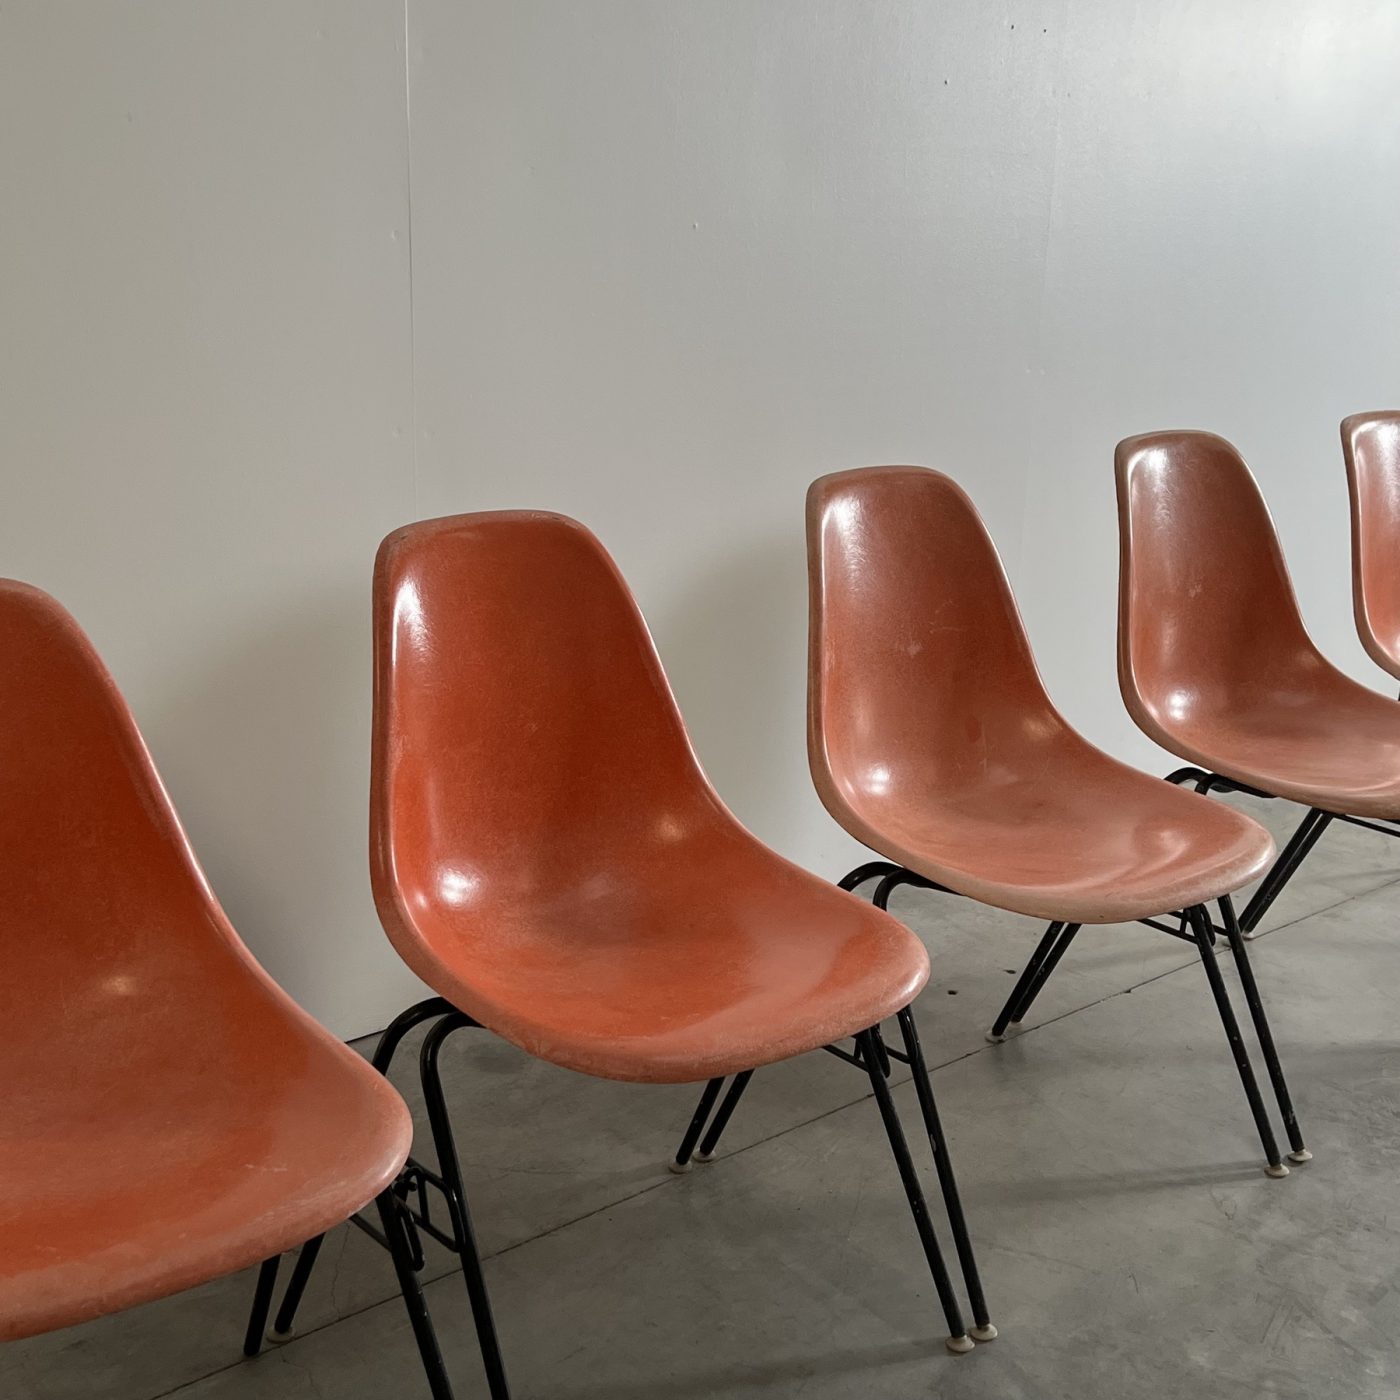 objet-eames-chairs0000